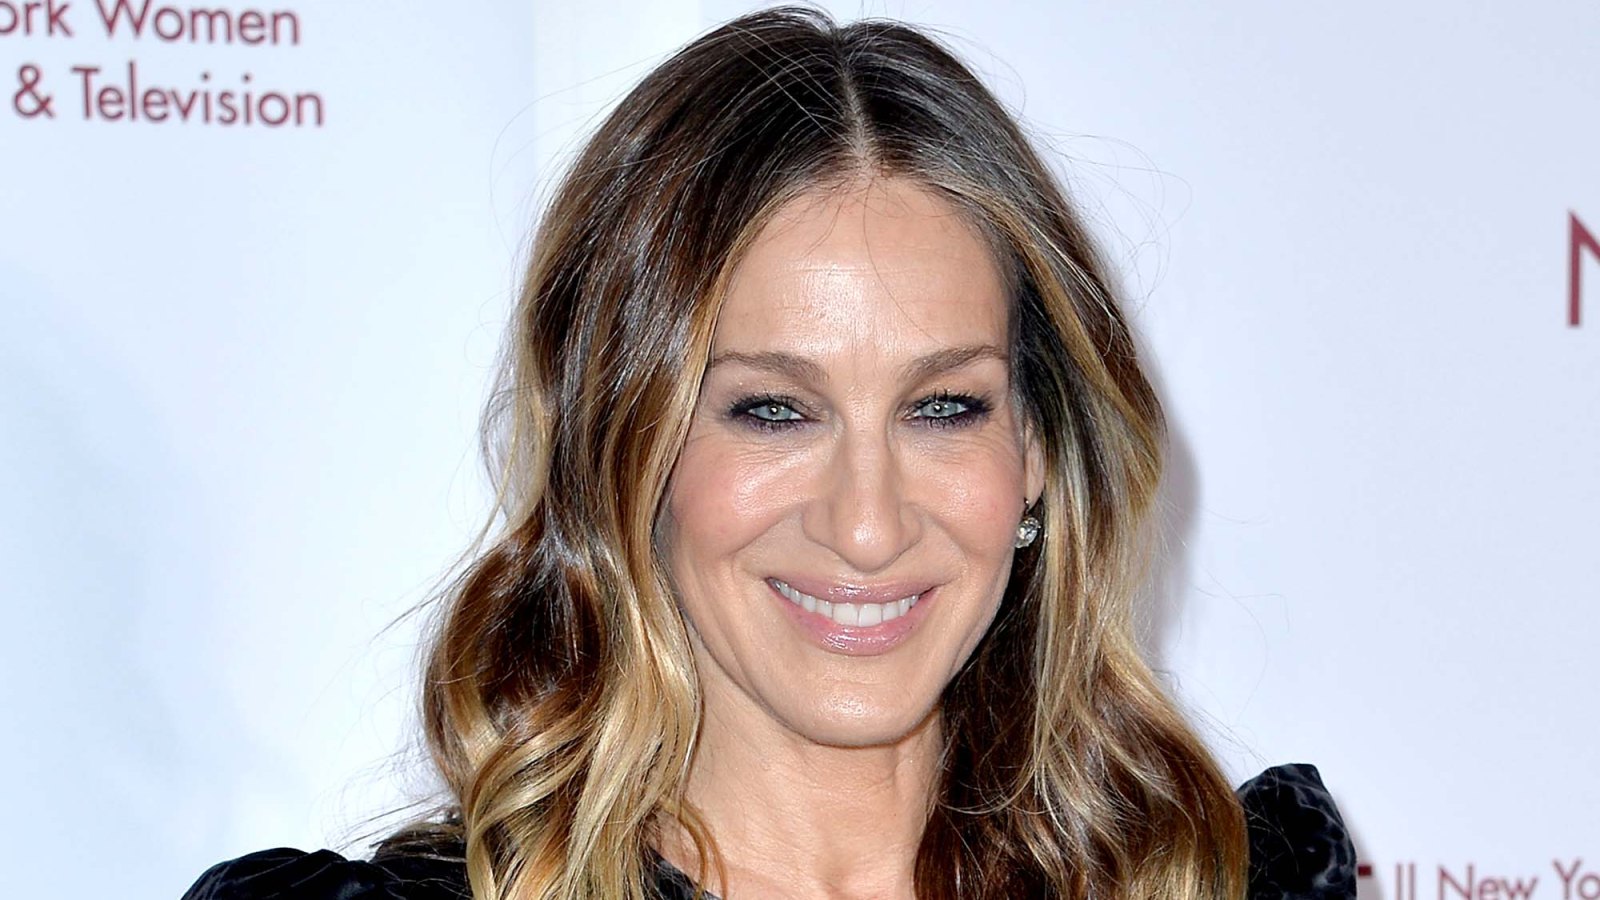 Sarah Jessica Parker Visits Carries Apartment Ahead of 1st Sex City Series Table Read Pics